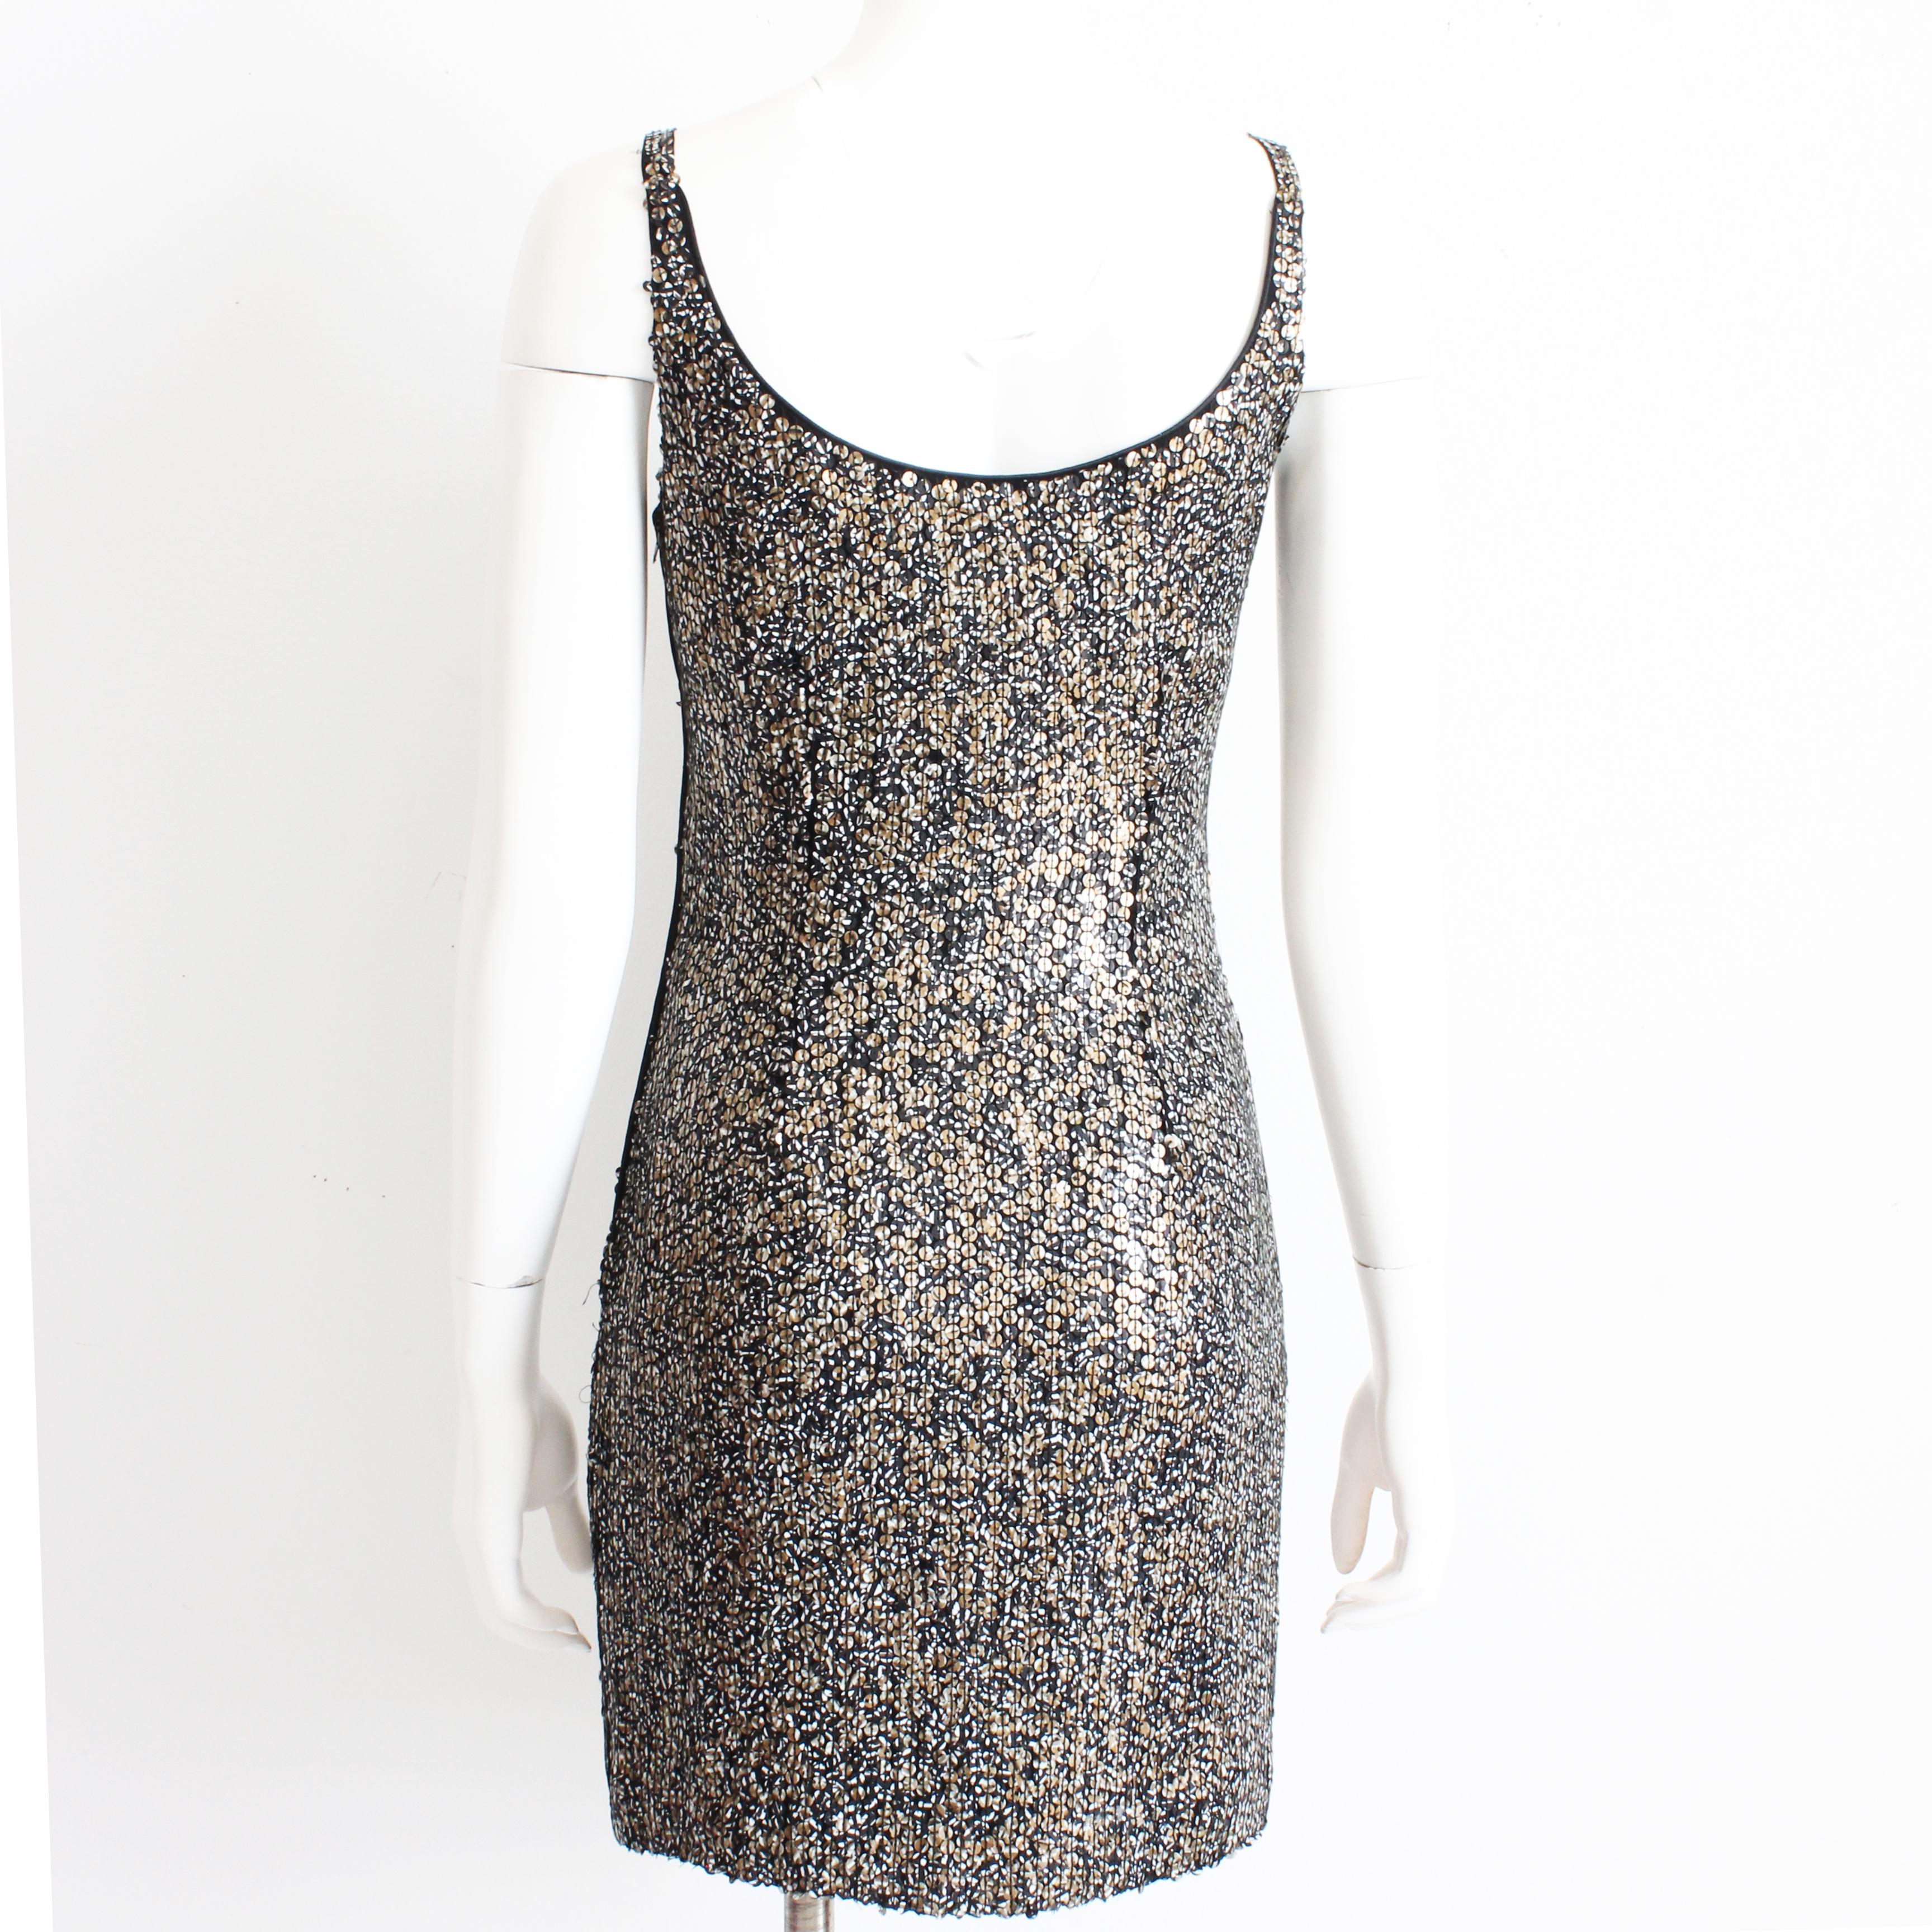 St. Martin by Jeanette Cocktail Dress Embellished Evening Wear Rare 90s Size 6  For Sale 7